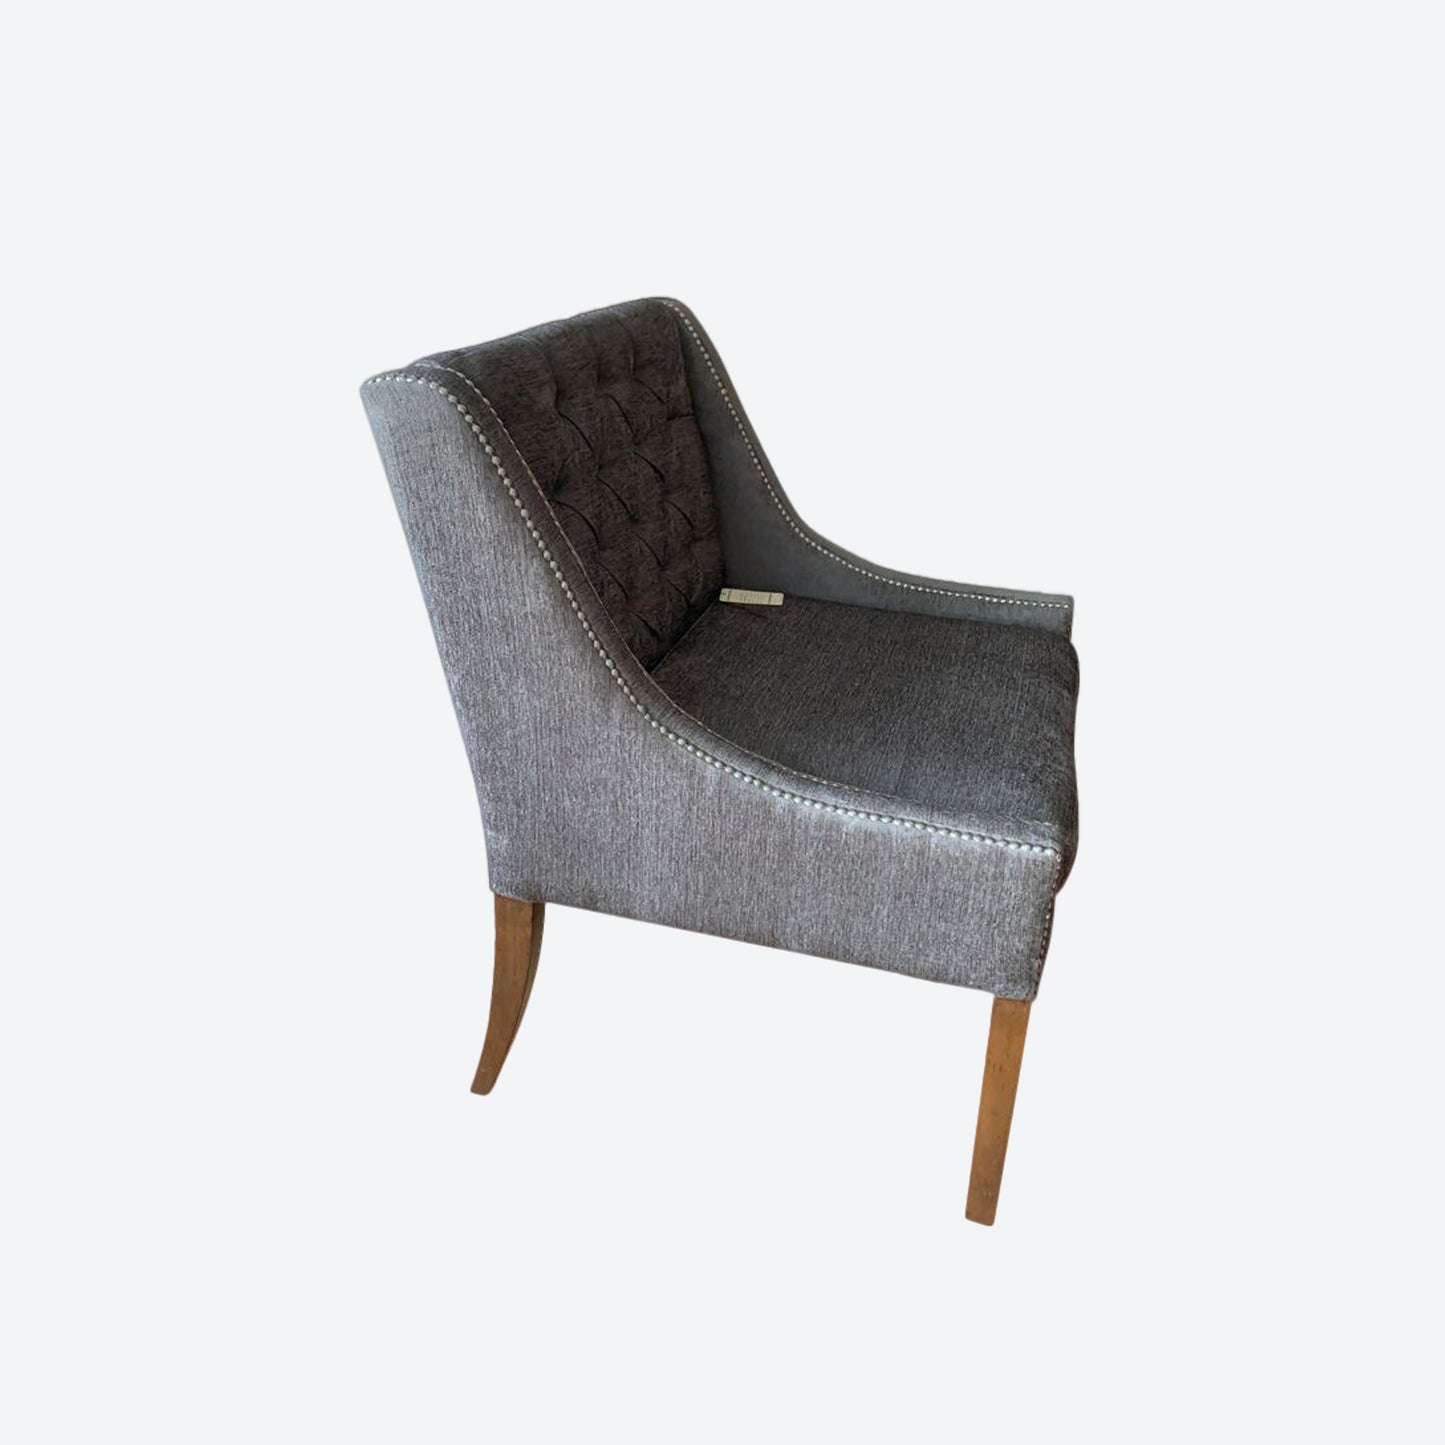 GRAY ORGANIC CANVAS FABRIC TUFTED ACCENT CHAIR WITH OAK LEGS -SK- SKU 1090